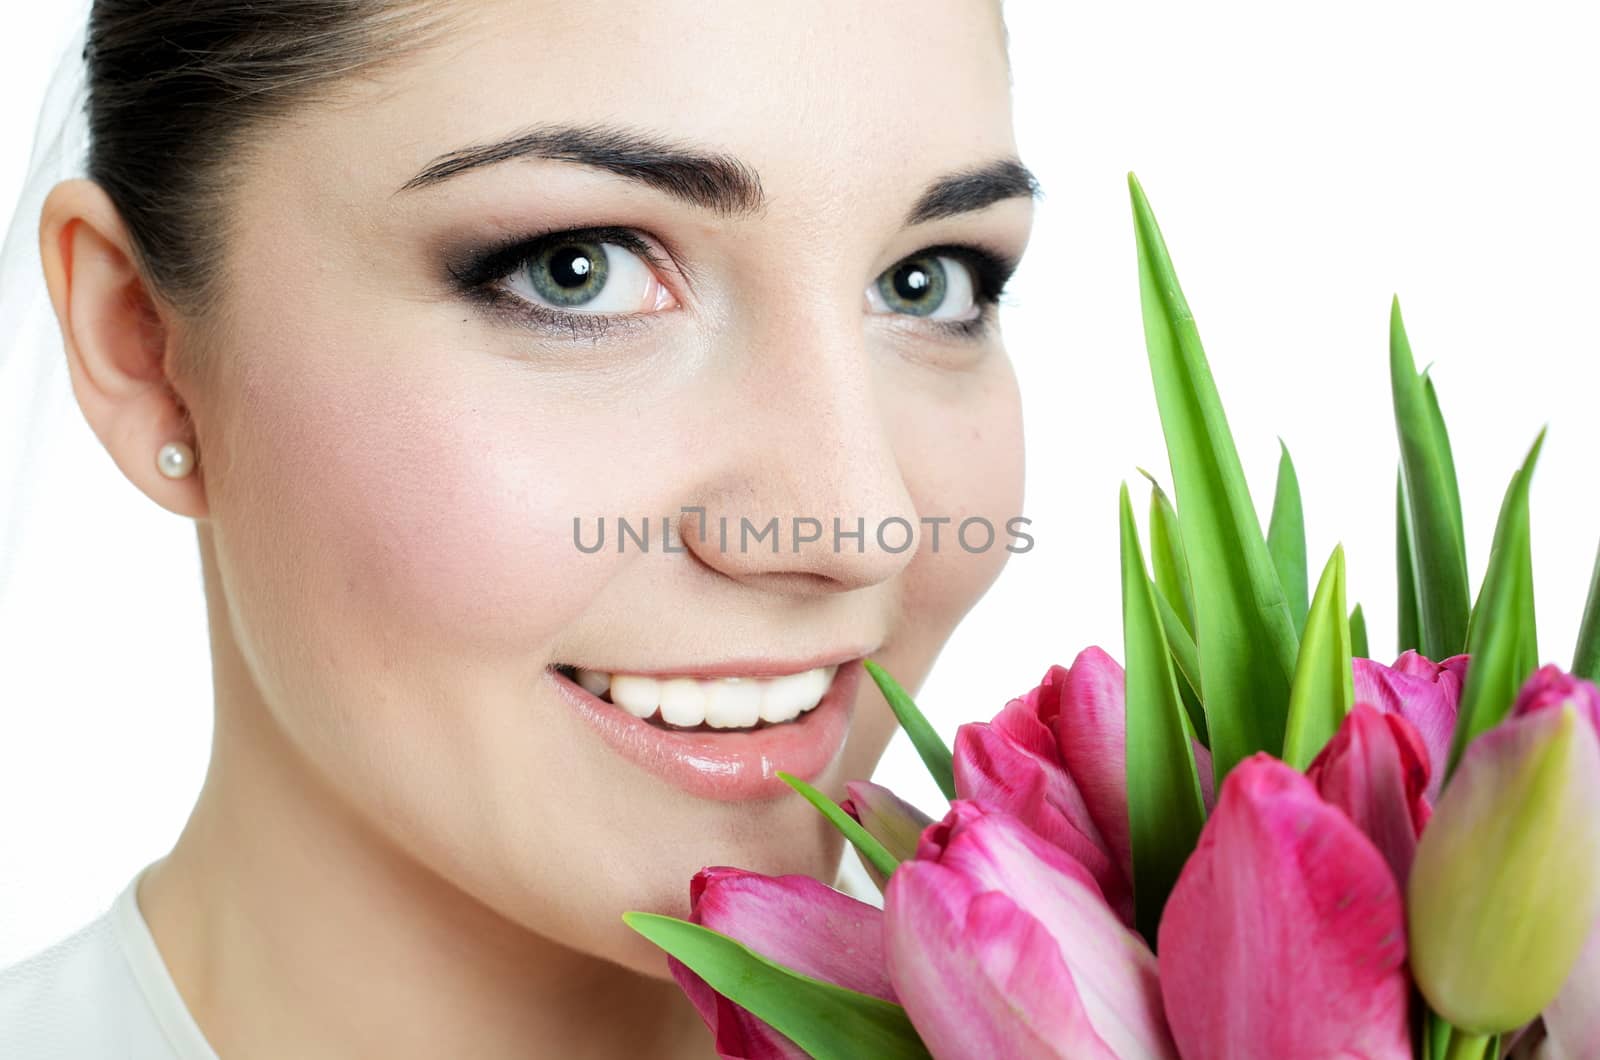 Beautiful, young bride closeup portrait. Young female holding flowers near her face.